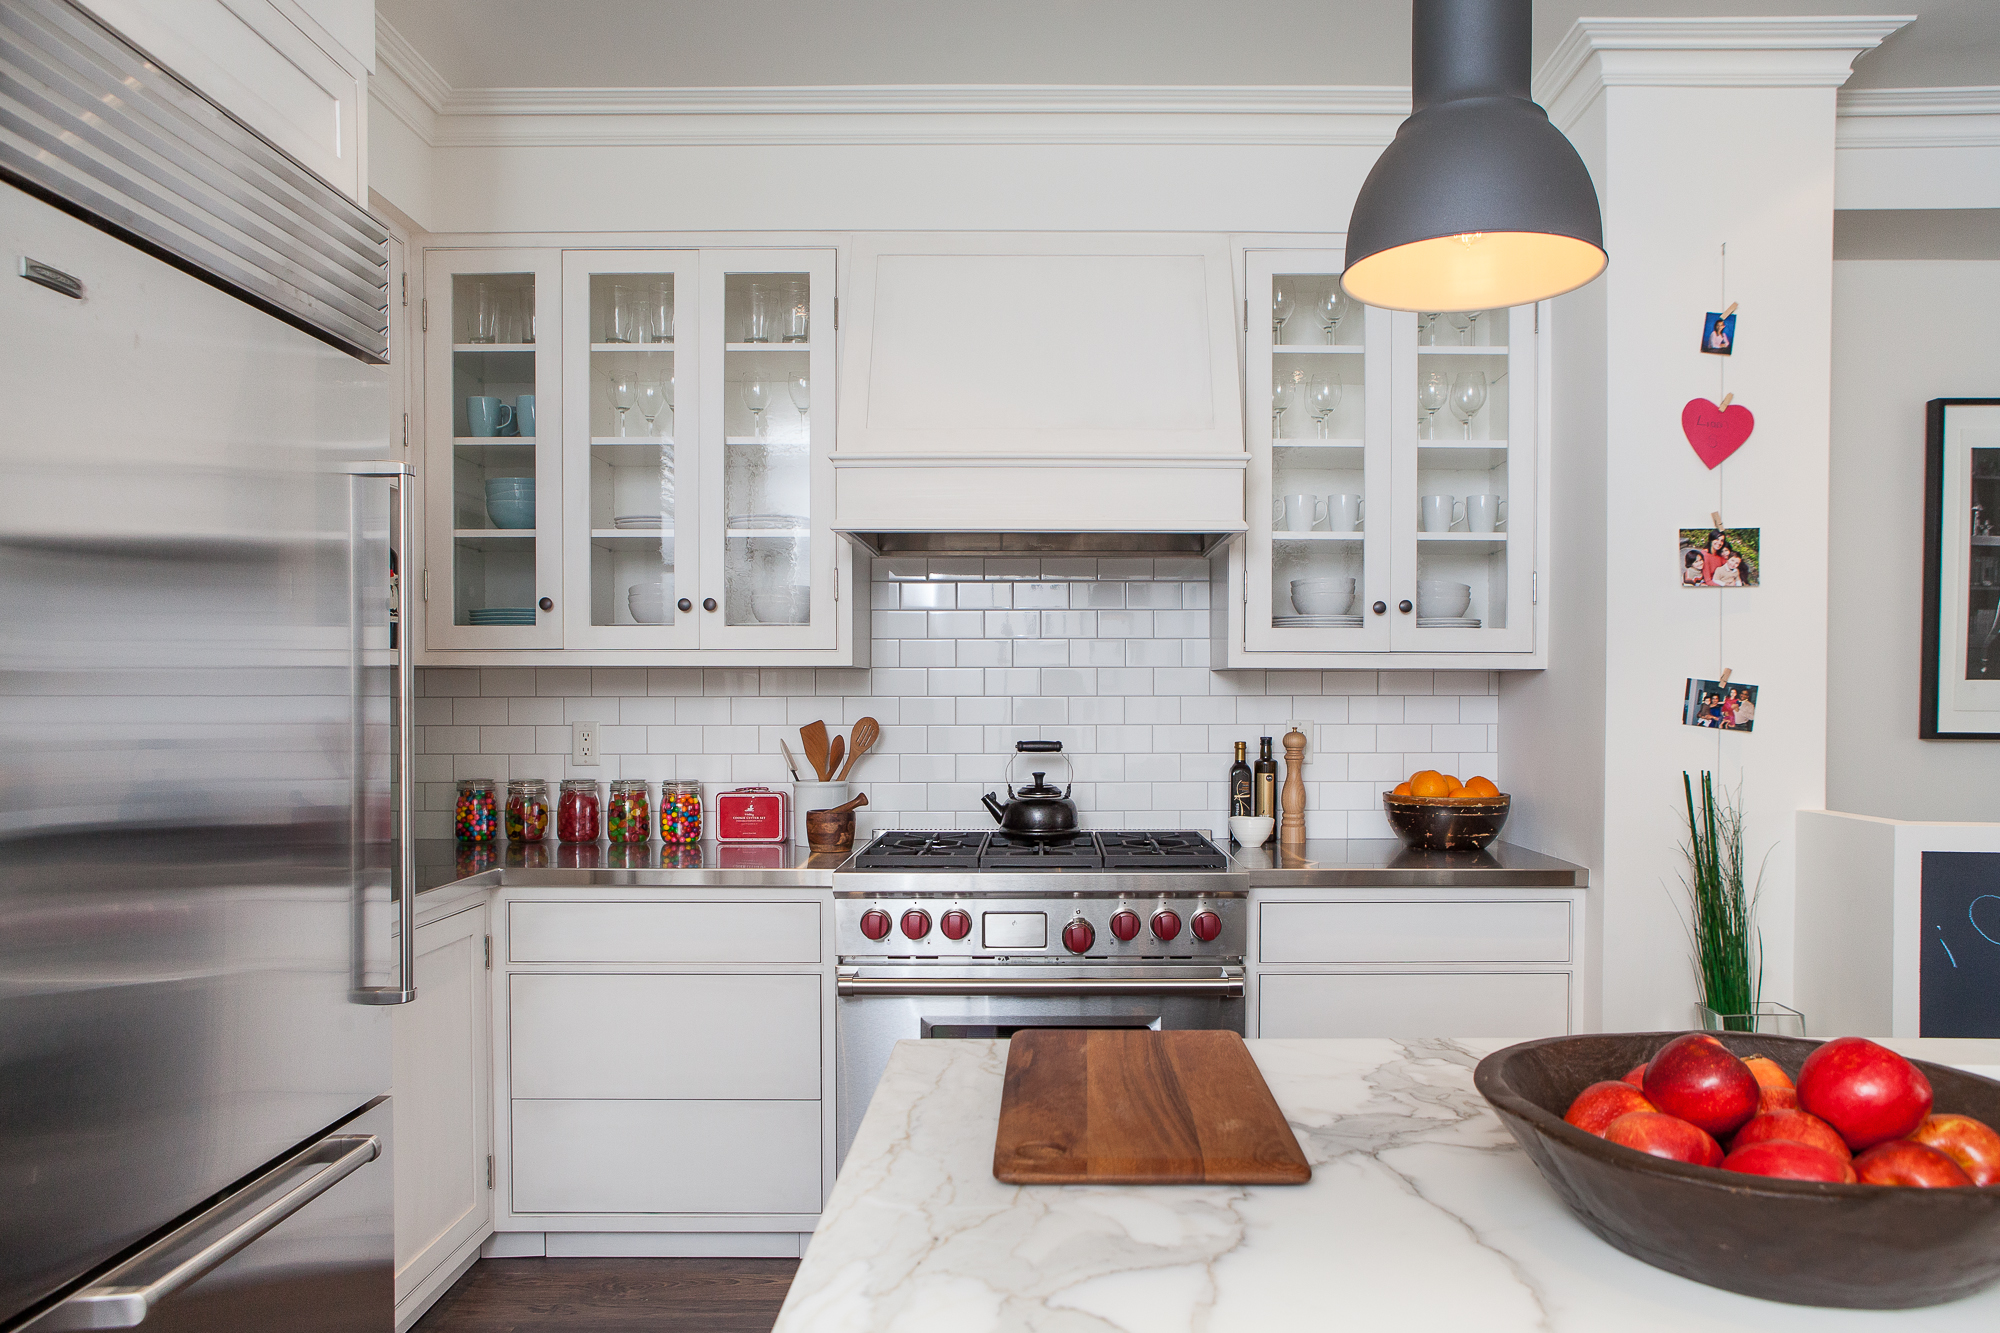 Timeless white kitchen with glass-fronted cabinetry doors to display dishware.